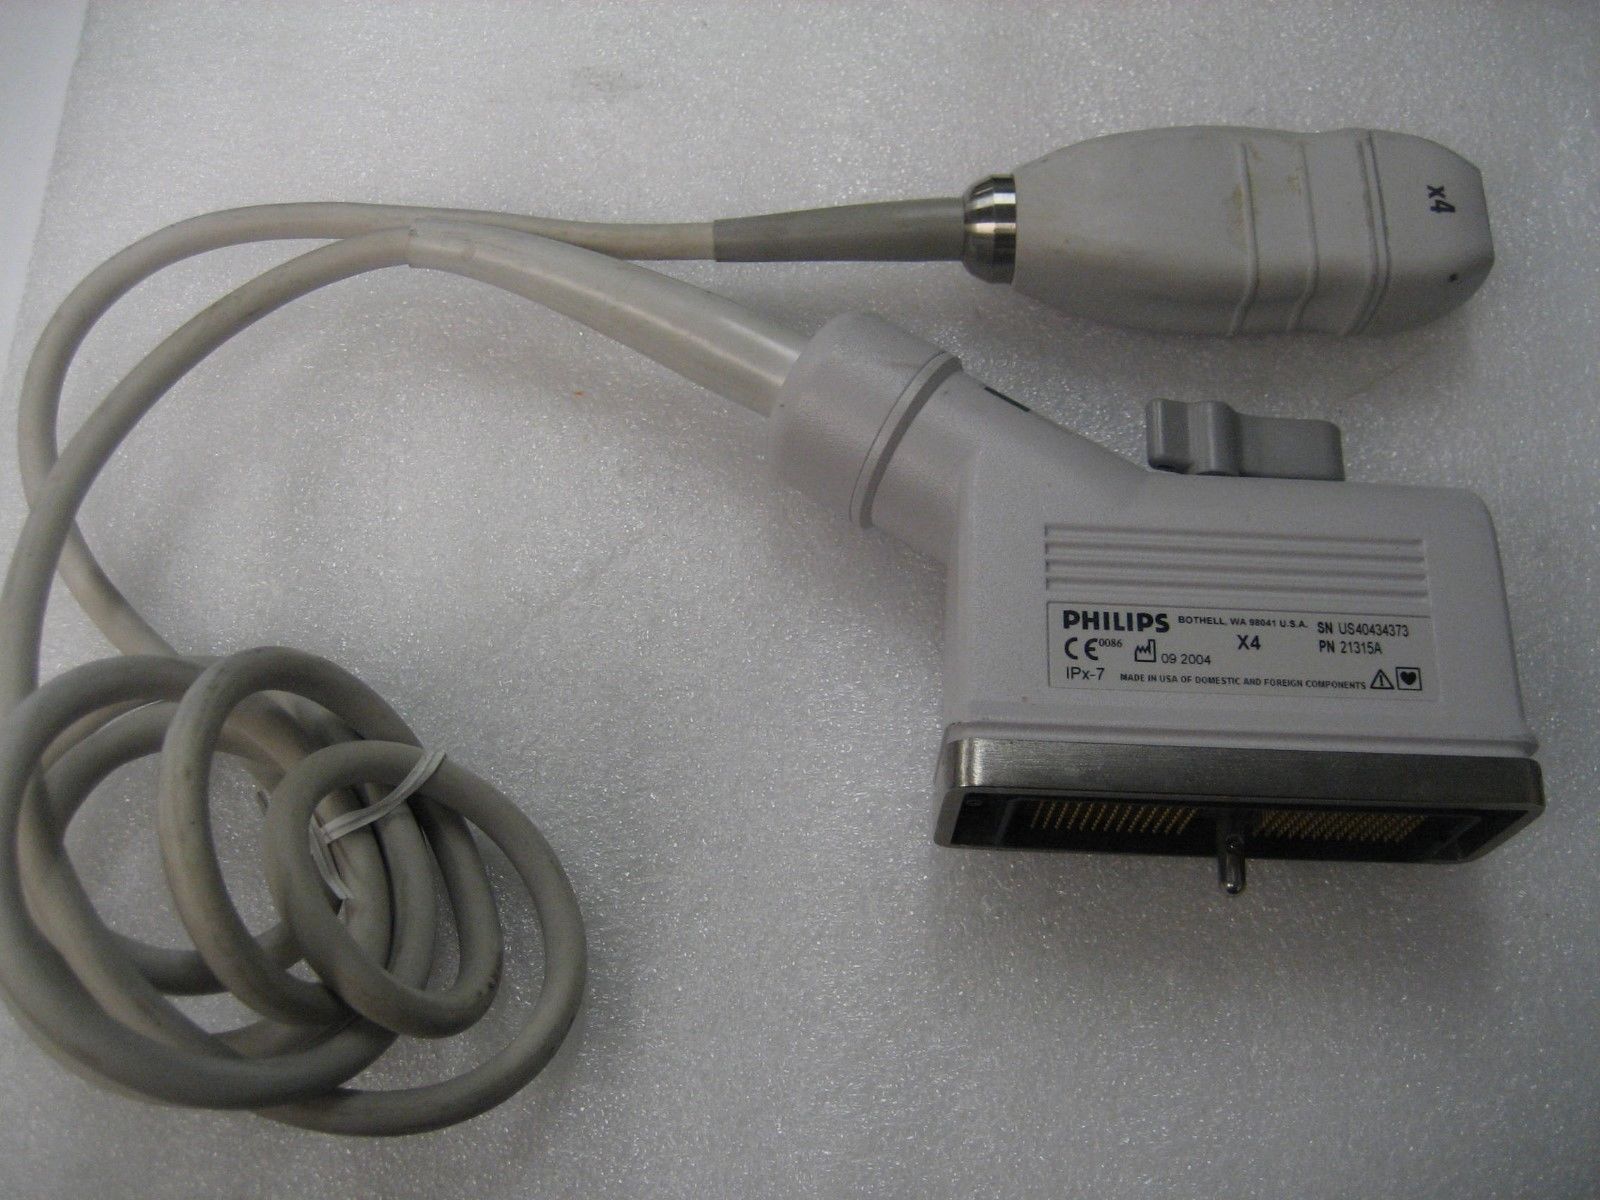 probe device on a white surface